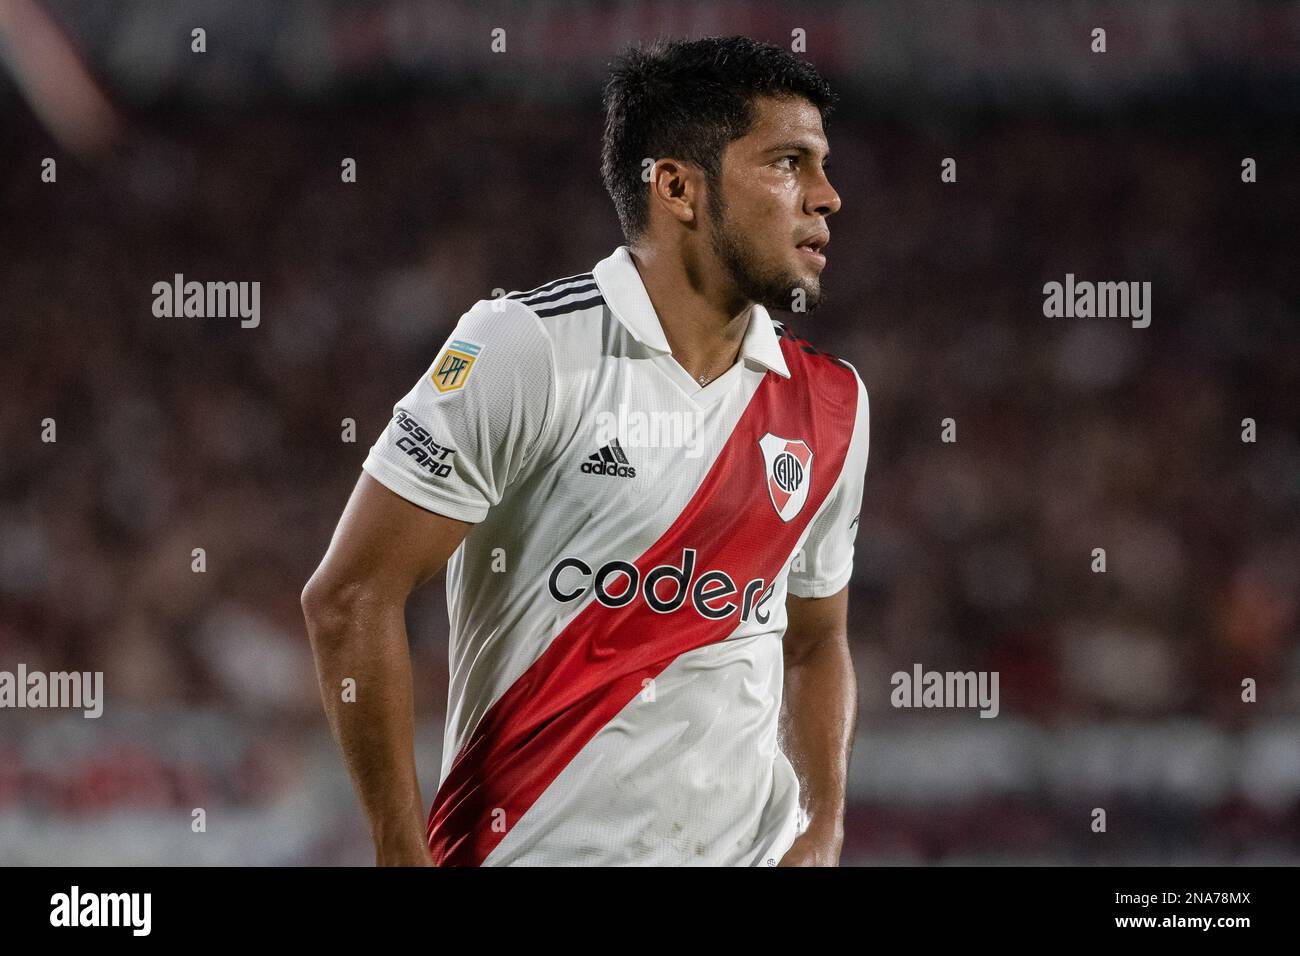 Antonio rojas hi-res stock photography and images - Alamy